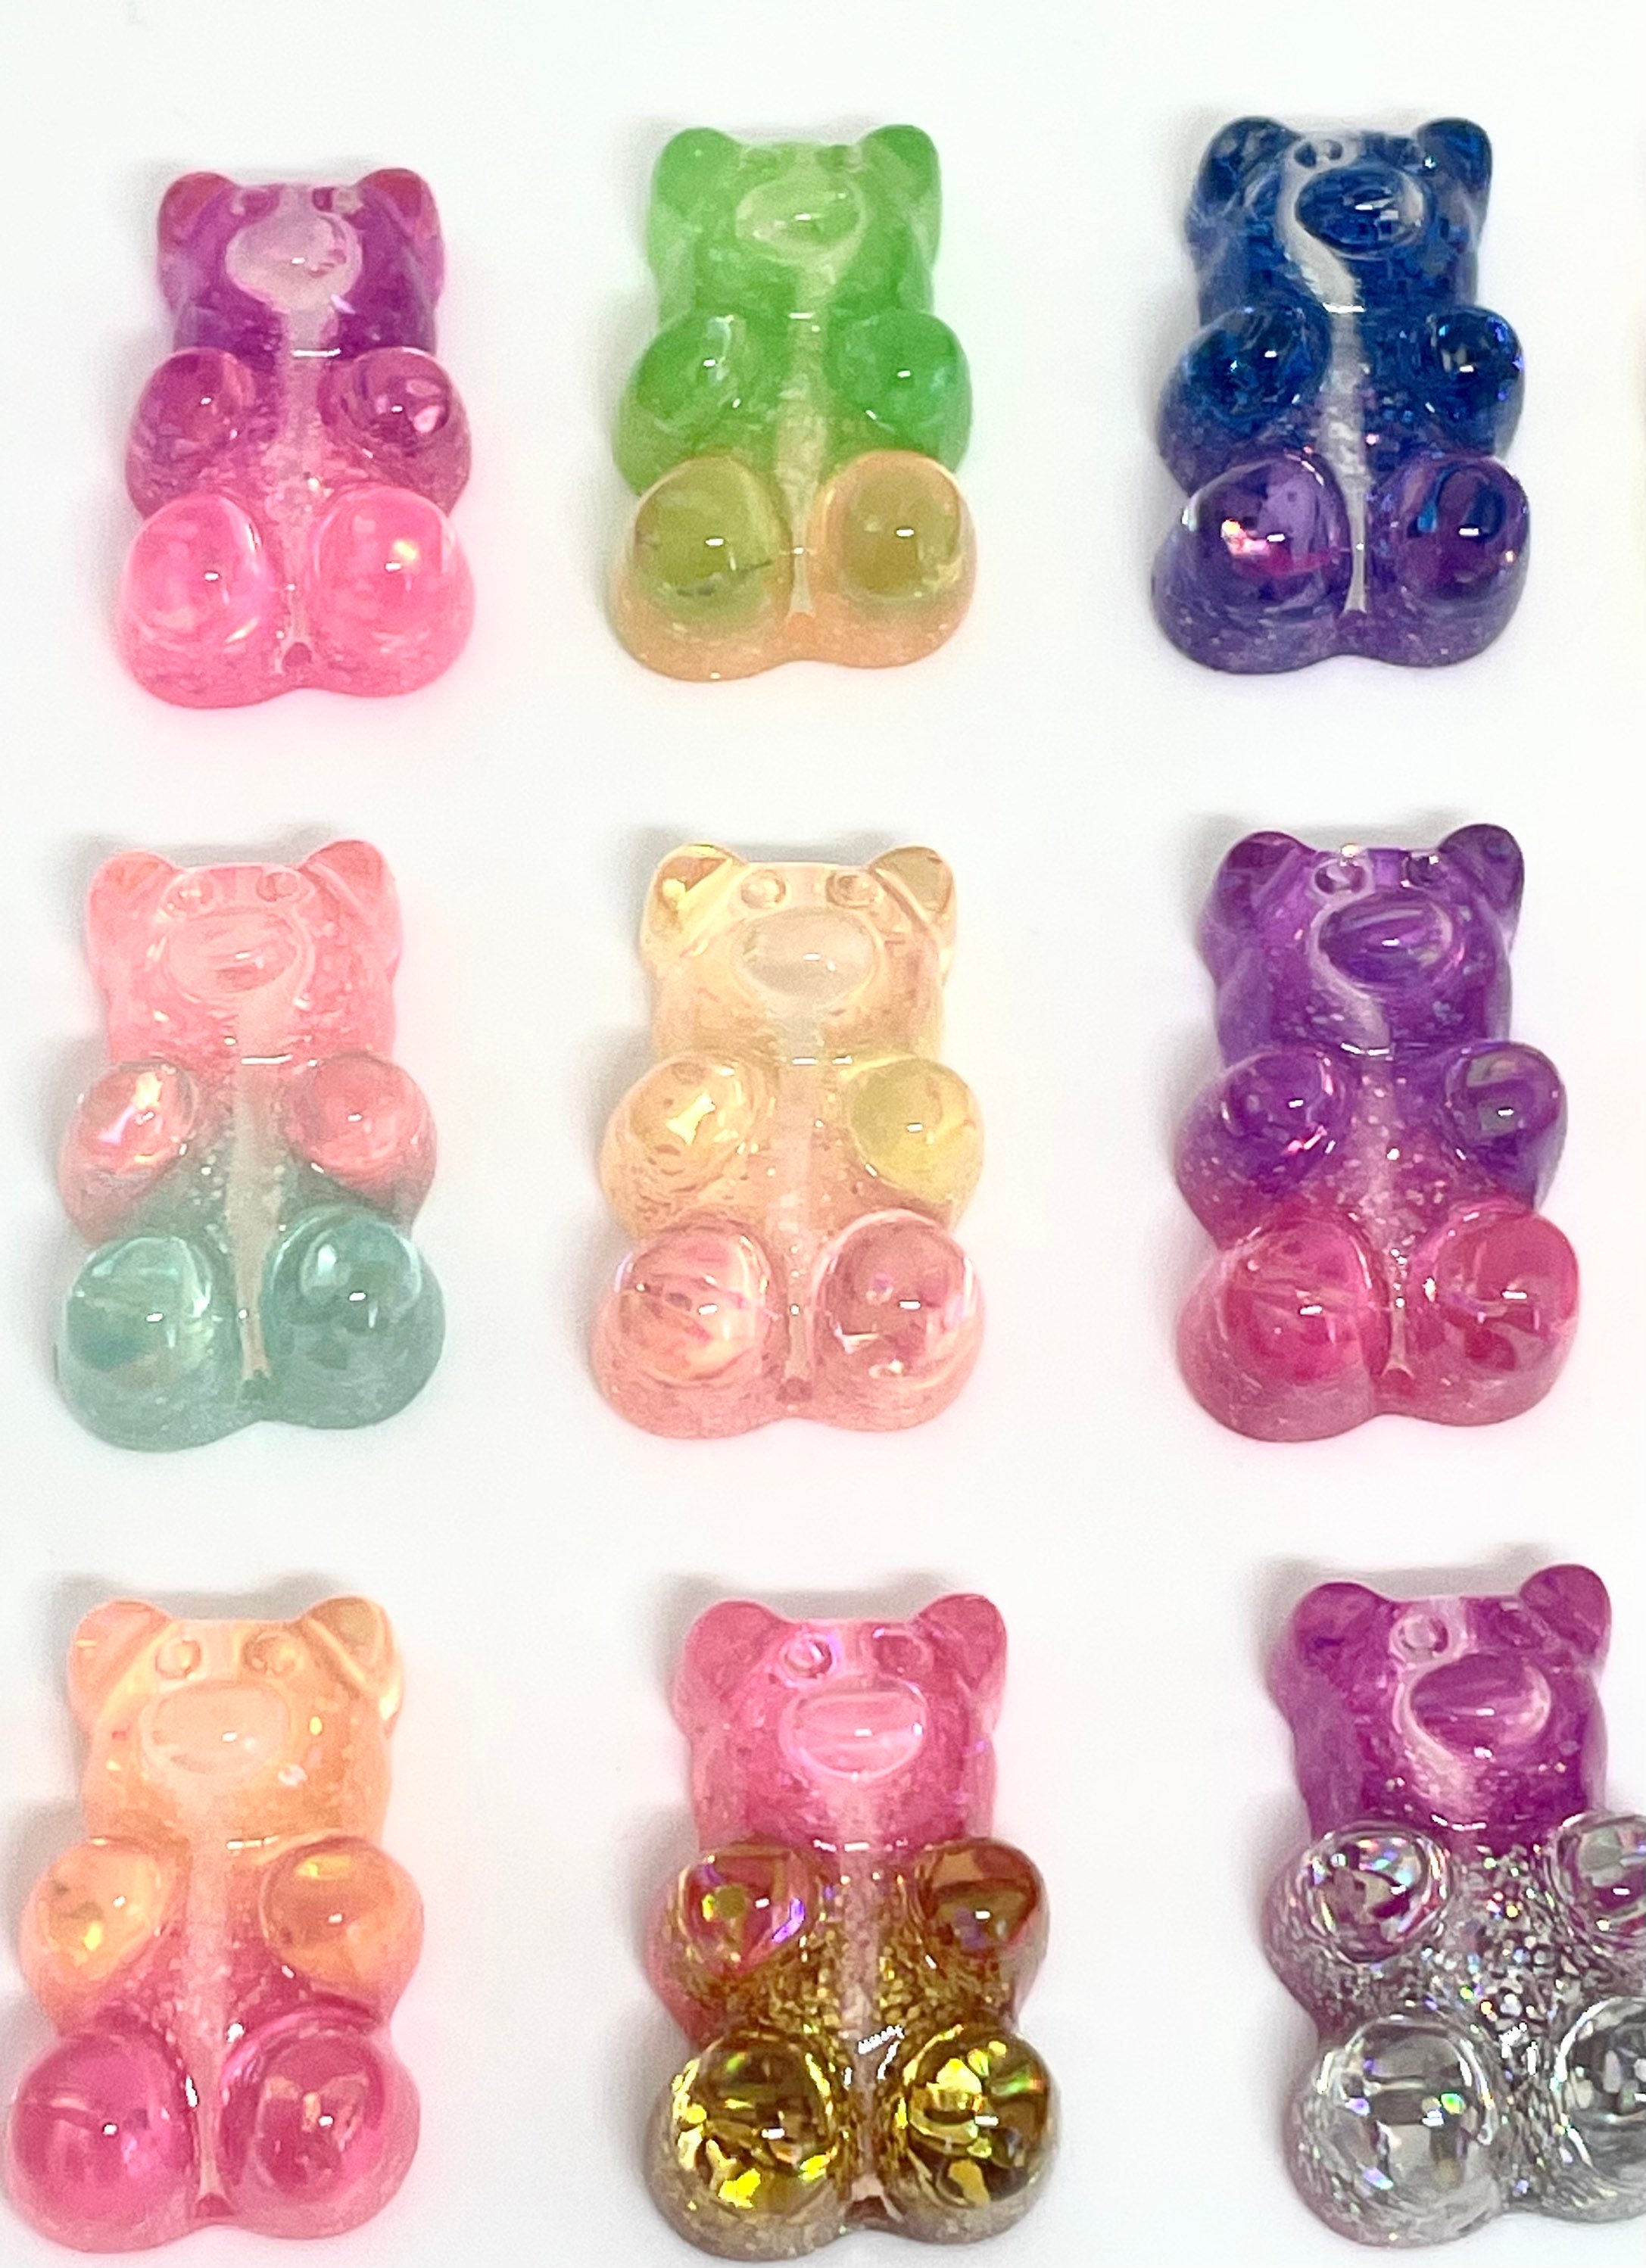 NEW 1 pc Gummy Bear Candy Charm Necklace Pendant DIY Jewelry Bead For  Earrings